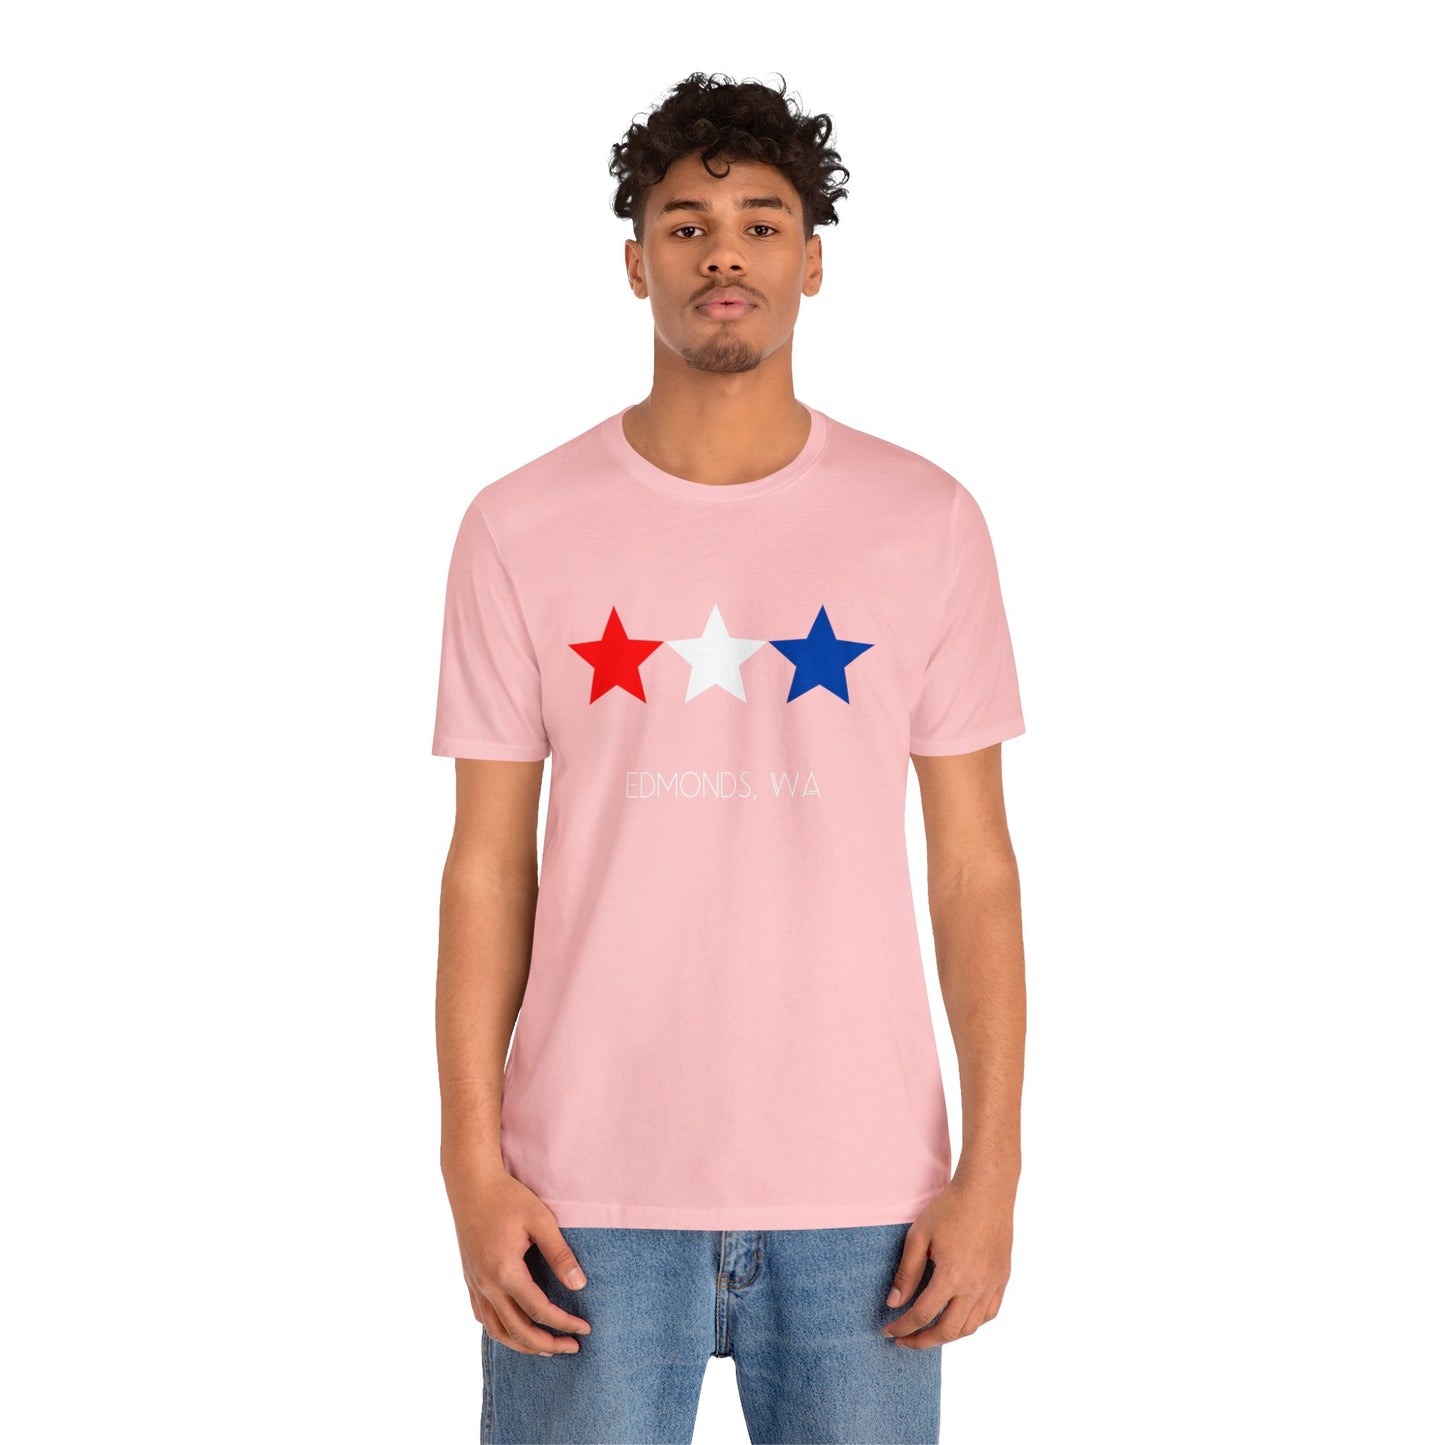 Edmonds Red White and Blue Star T-shirt